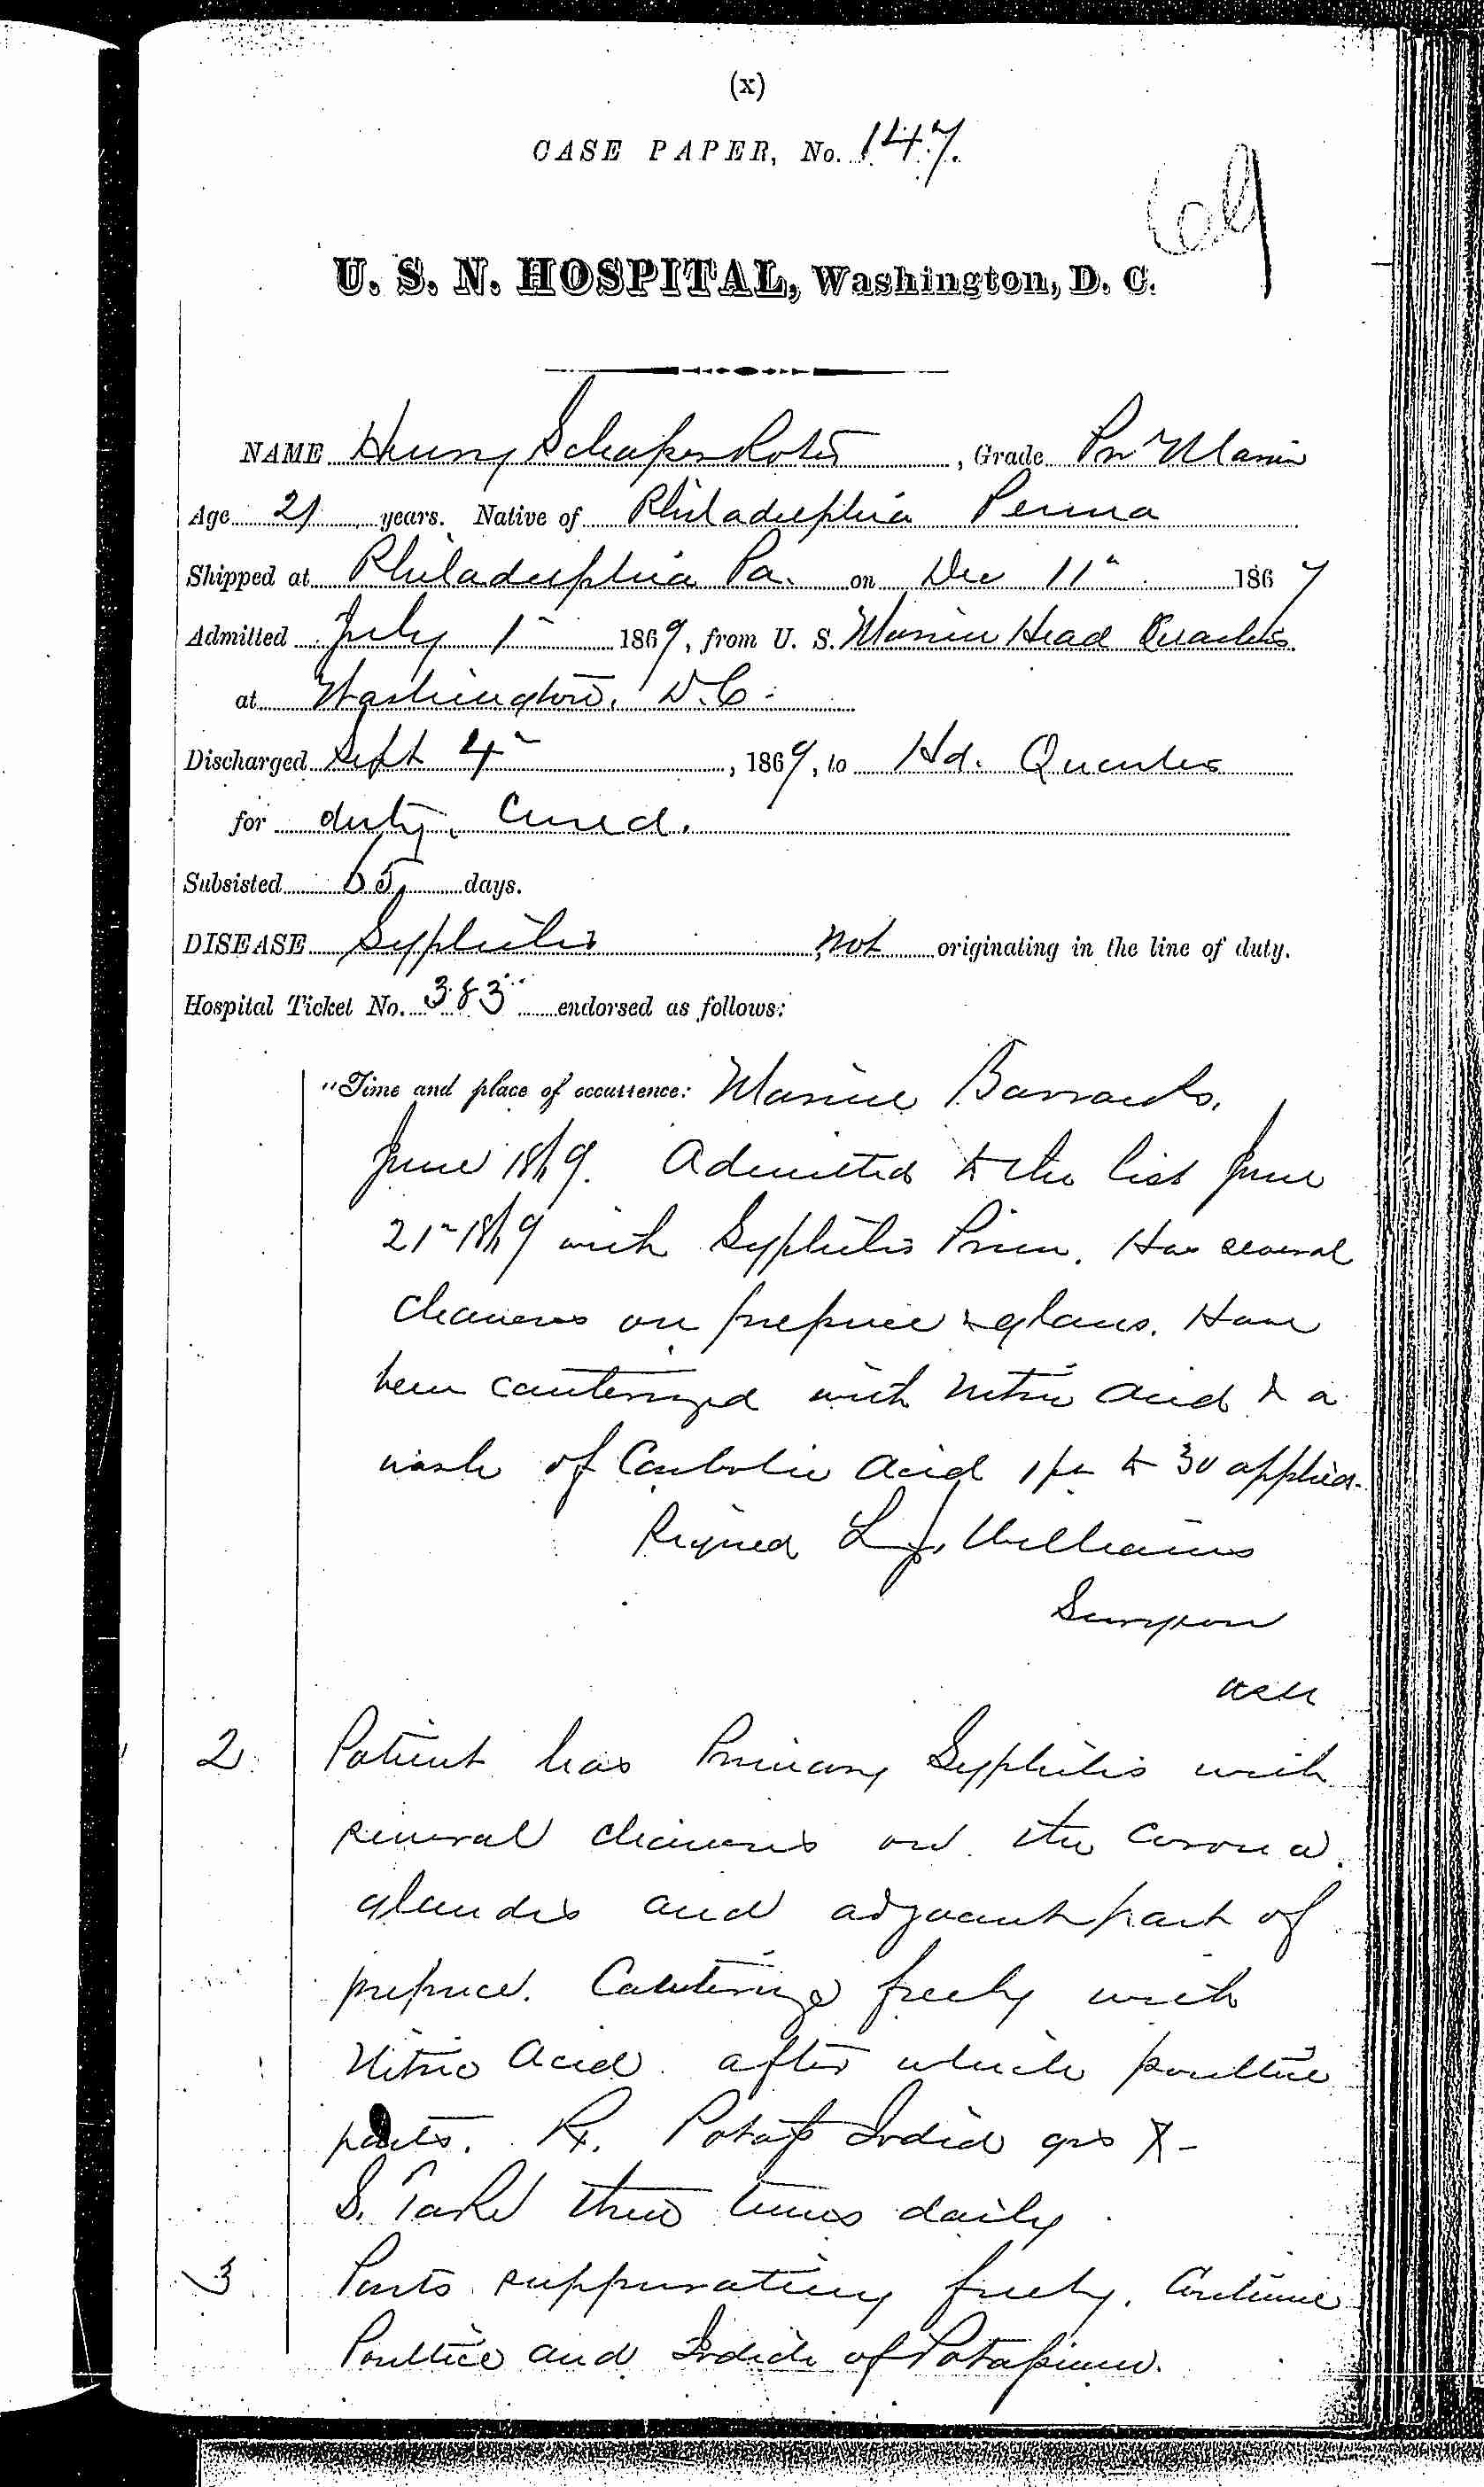 Entry for Henry Schapenkoter (page 1 of 3) in the log Hospital Tickets and Case Papers - Naval Hospital - Washington, D.C. - 1868-69